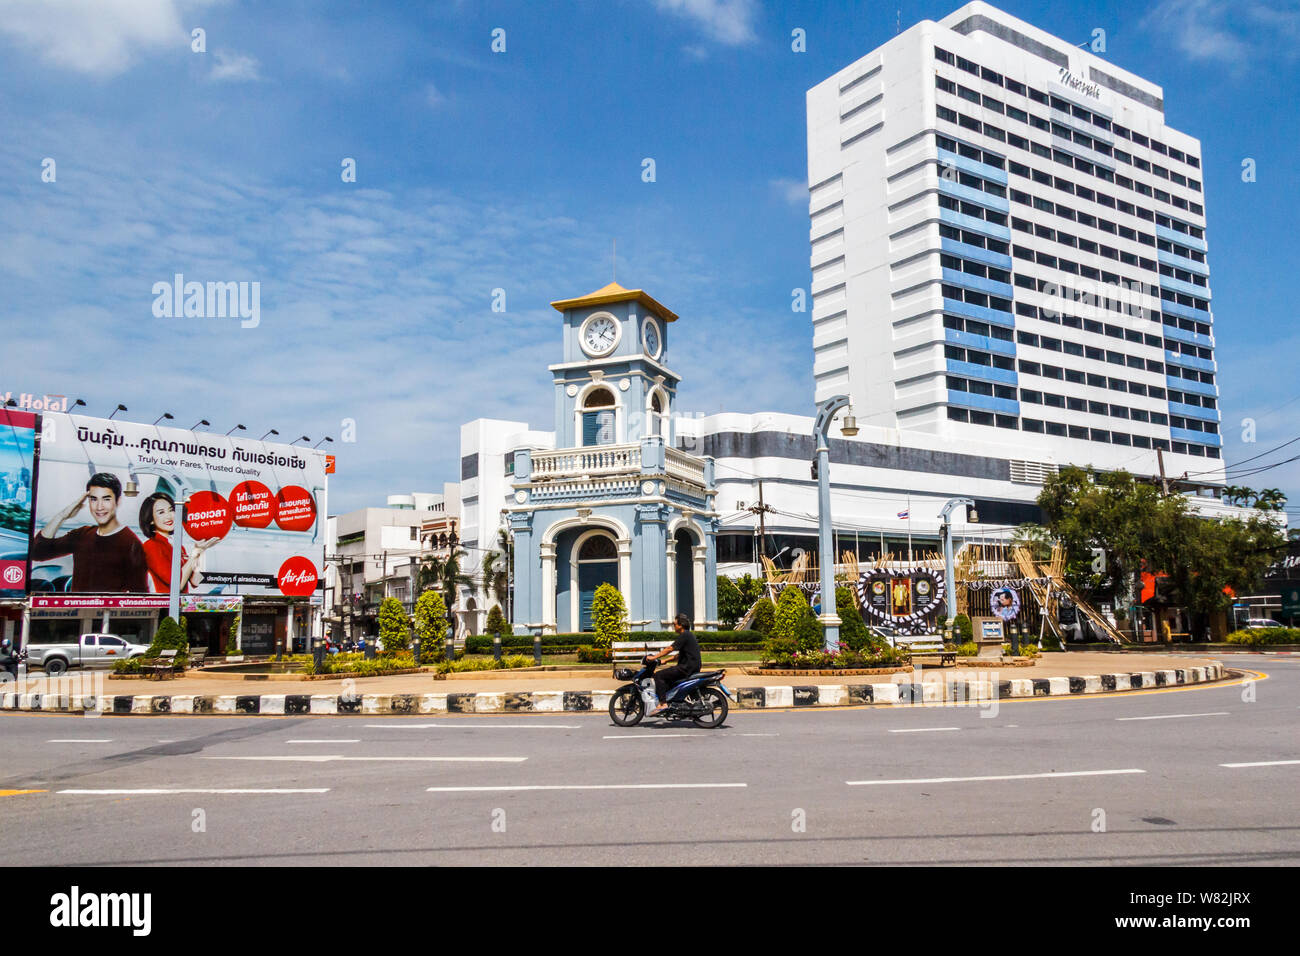 Phuket, Thailand - November 2nd 2016: The clock tower at Surin circle, The tower is a famous landmark in the centre of town. Stock Photo